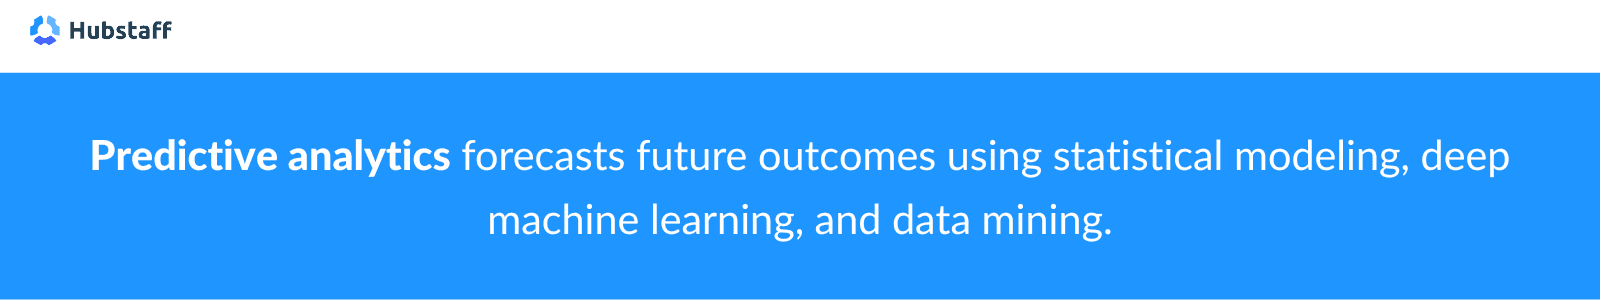 Predictive analytics forecasts future outcomes using statistical modeling, deep machine learning, and data mining.